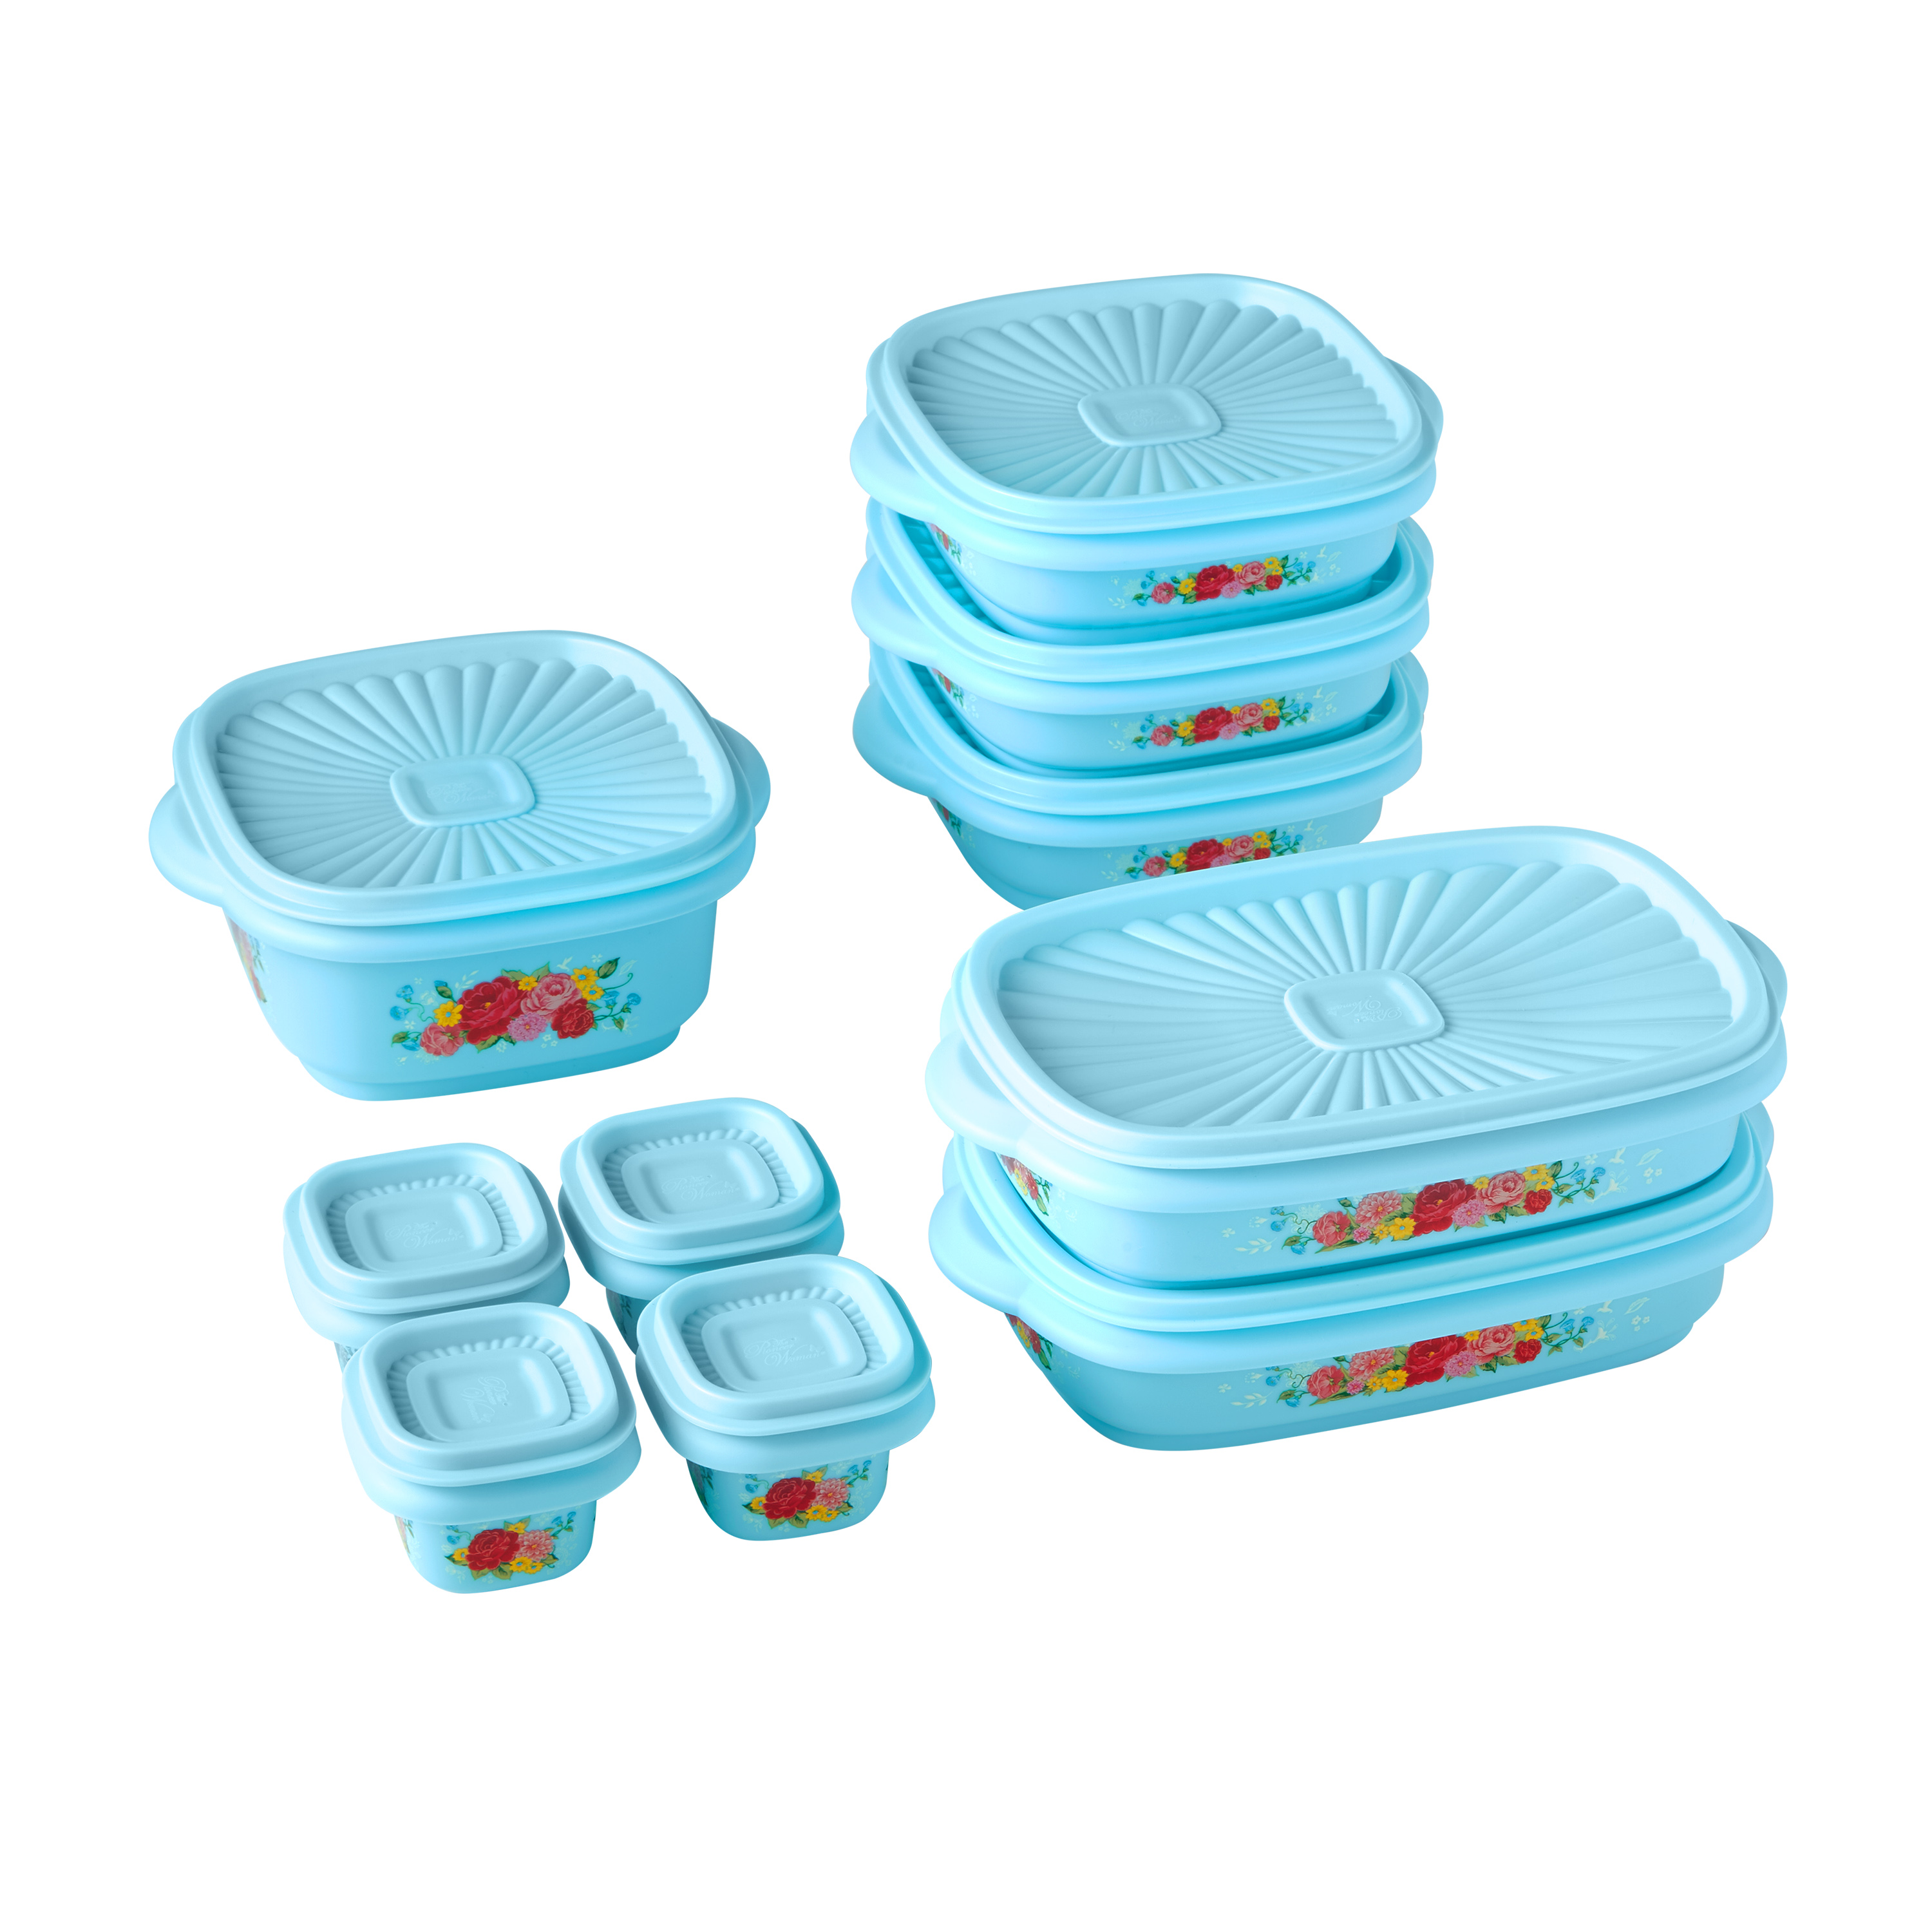 The Pioneer Woman 20 Piece Plastic Food Storage Container Variety Set, Sweet Rose - image 1 of 4